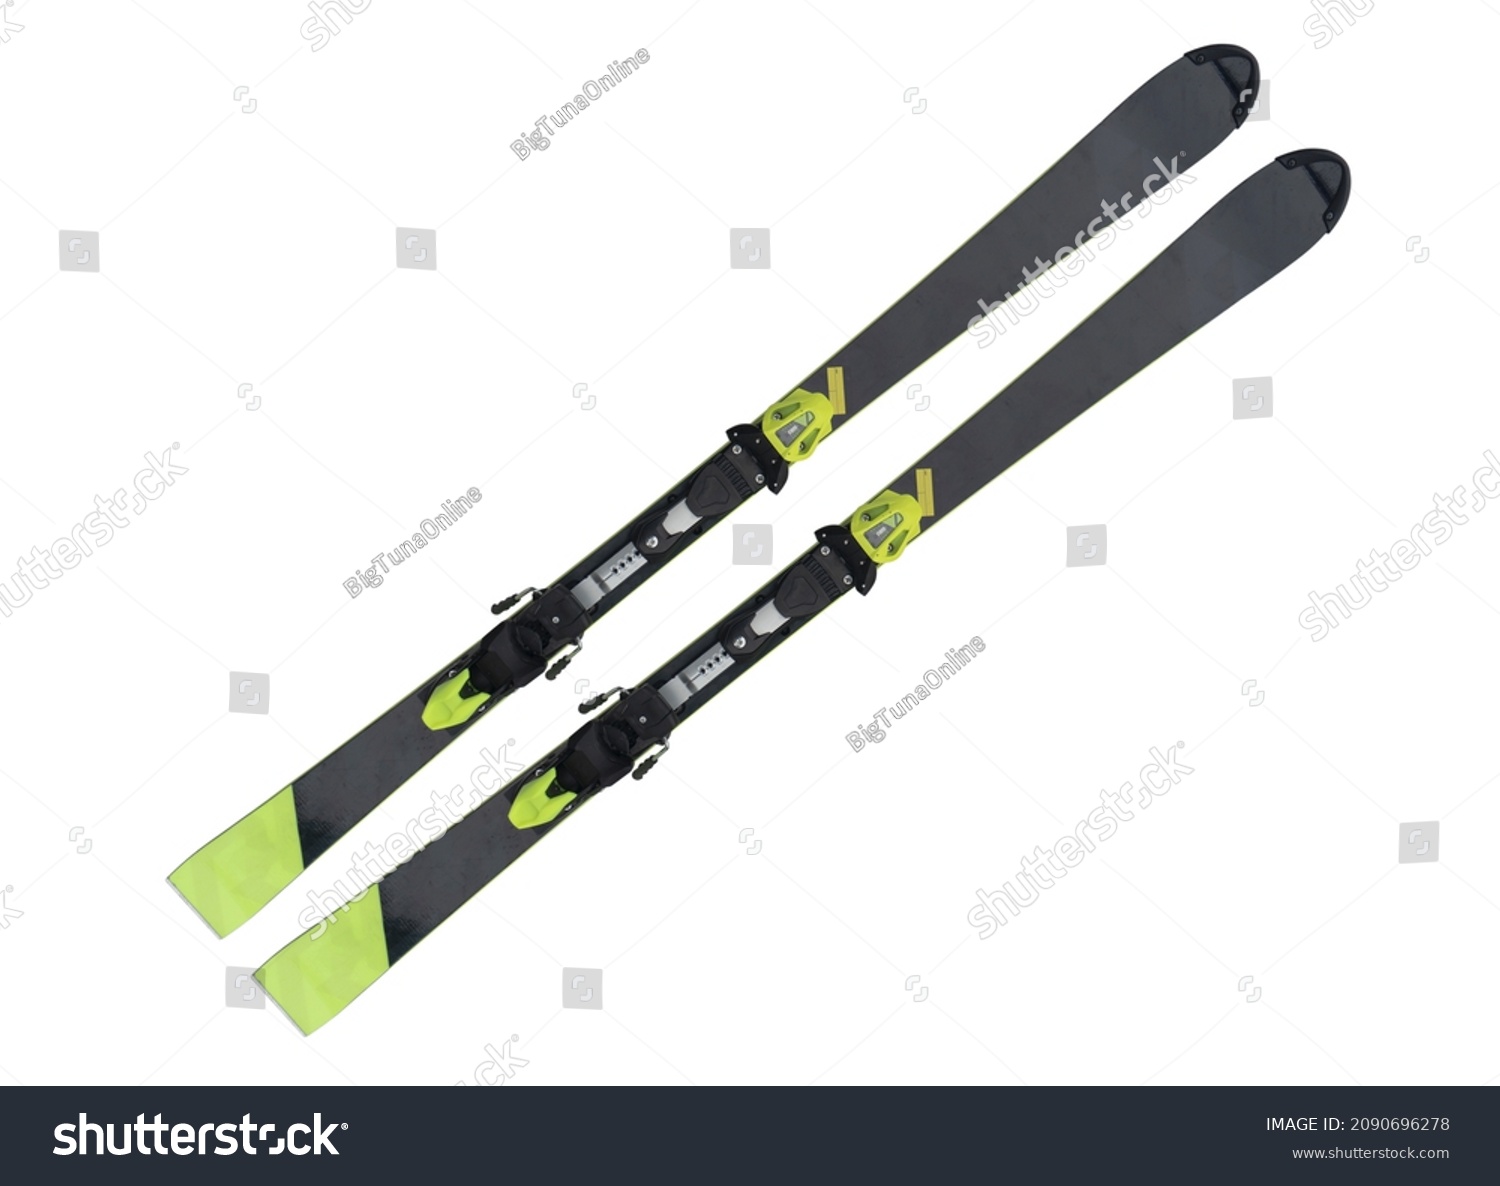 Pair of alpine skis isolated on white background. Sport equipment for skiing.  #2090696278